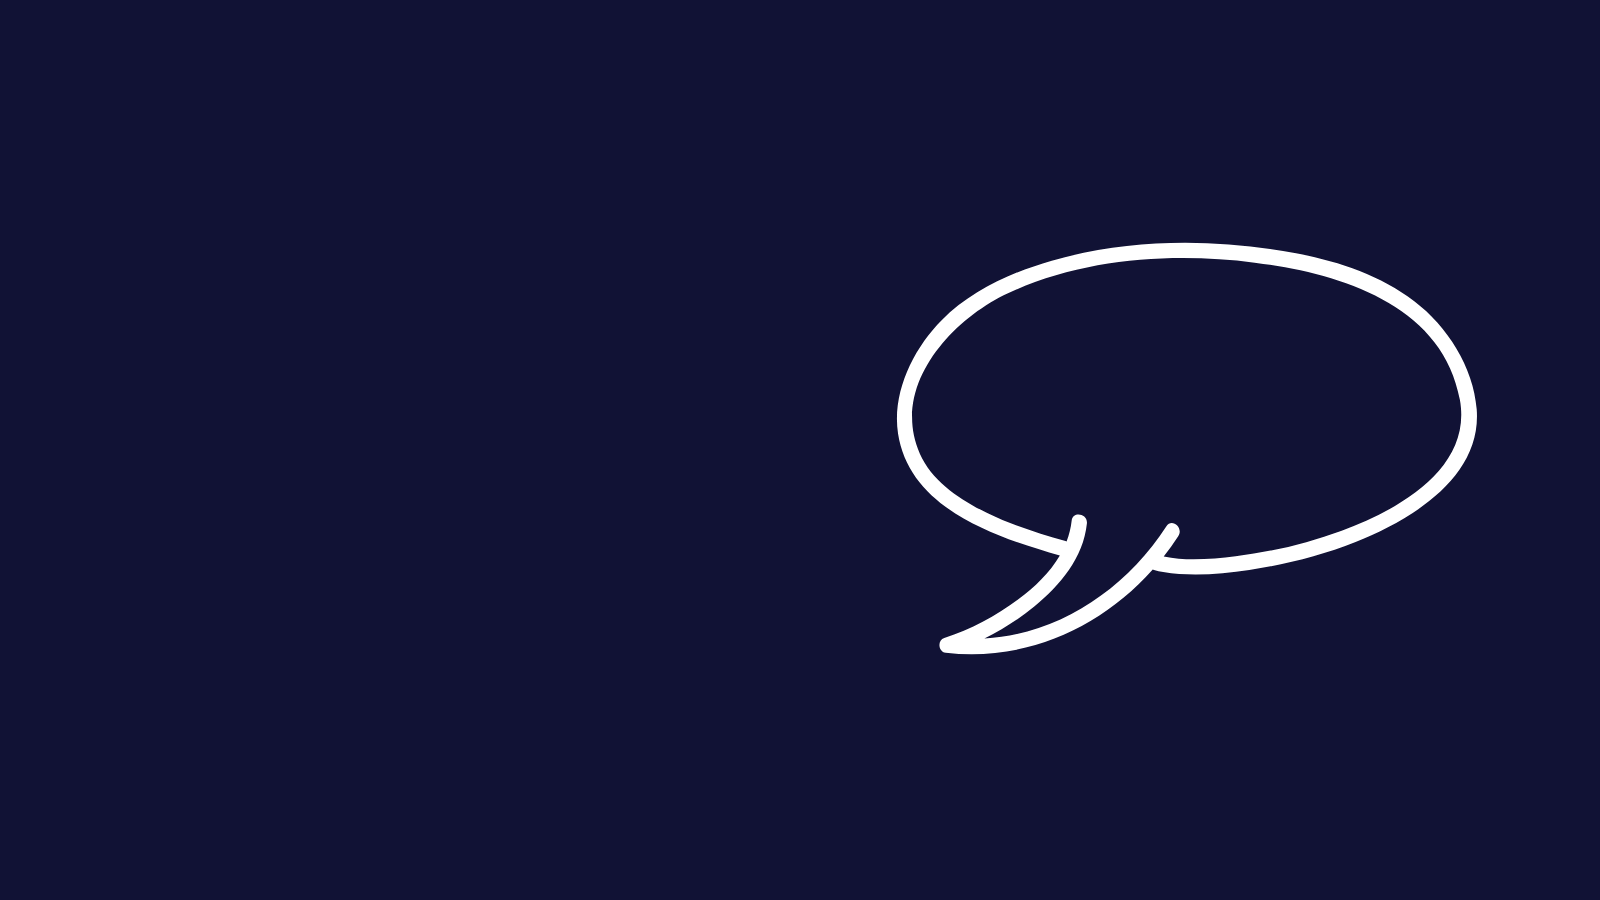 A dark blue background and on the right is a white empty speech bubble drawing.